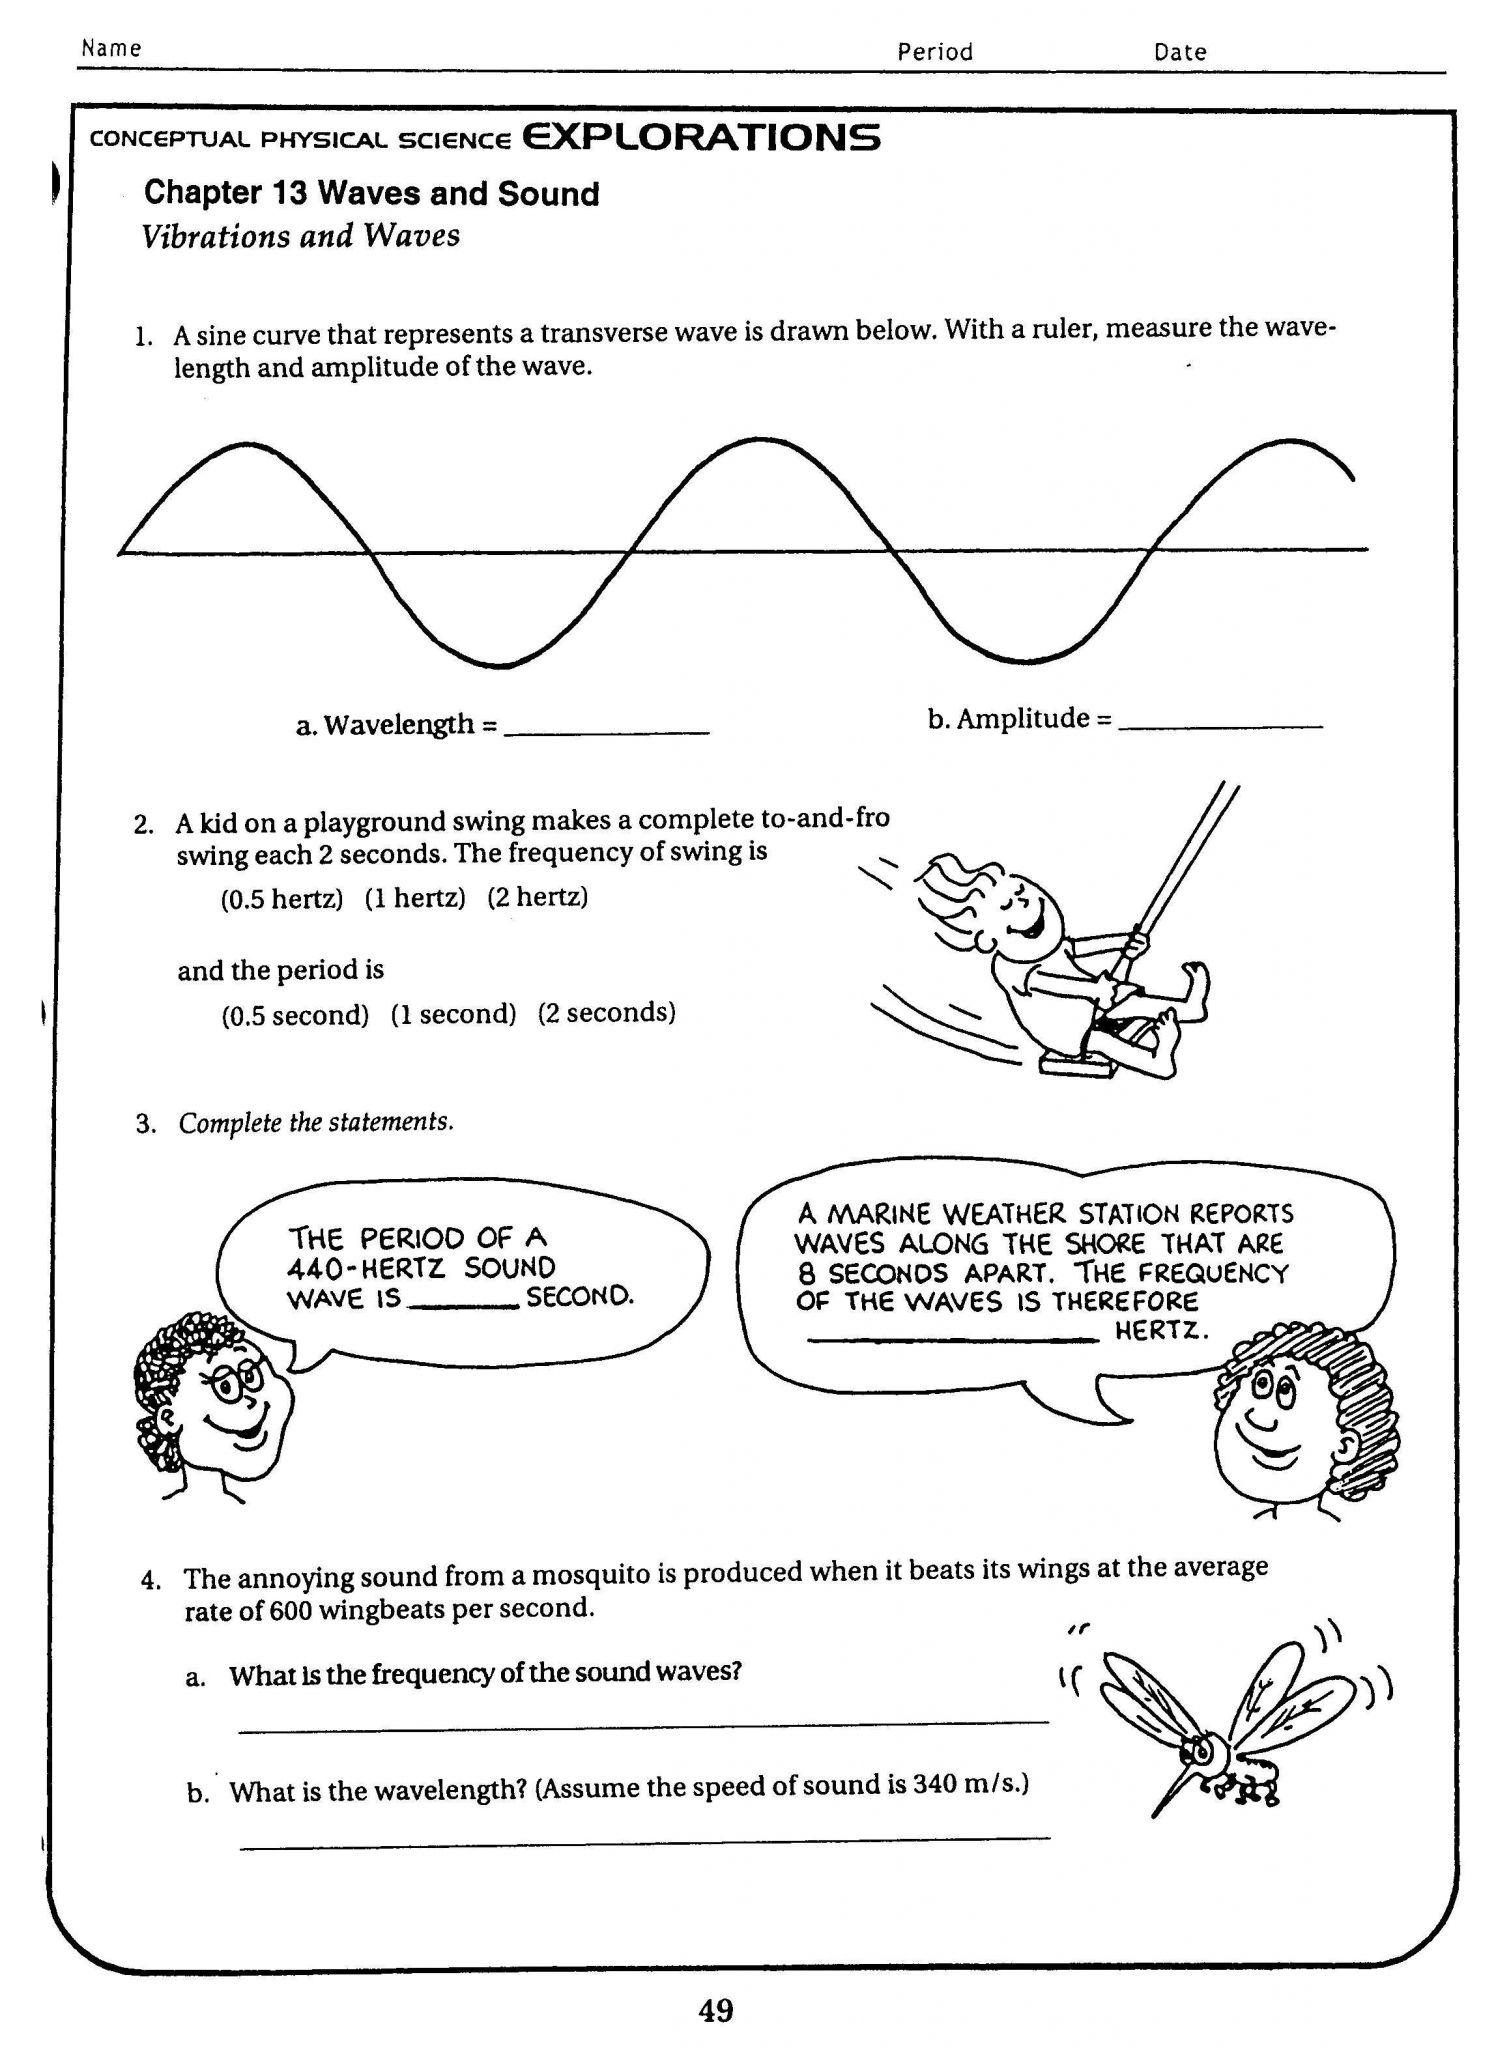 Waves Worksheet Answer Key Physics Also Wave Review Worksheet Answers Image Collections Worksheet for Kids